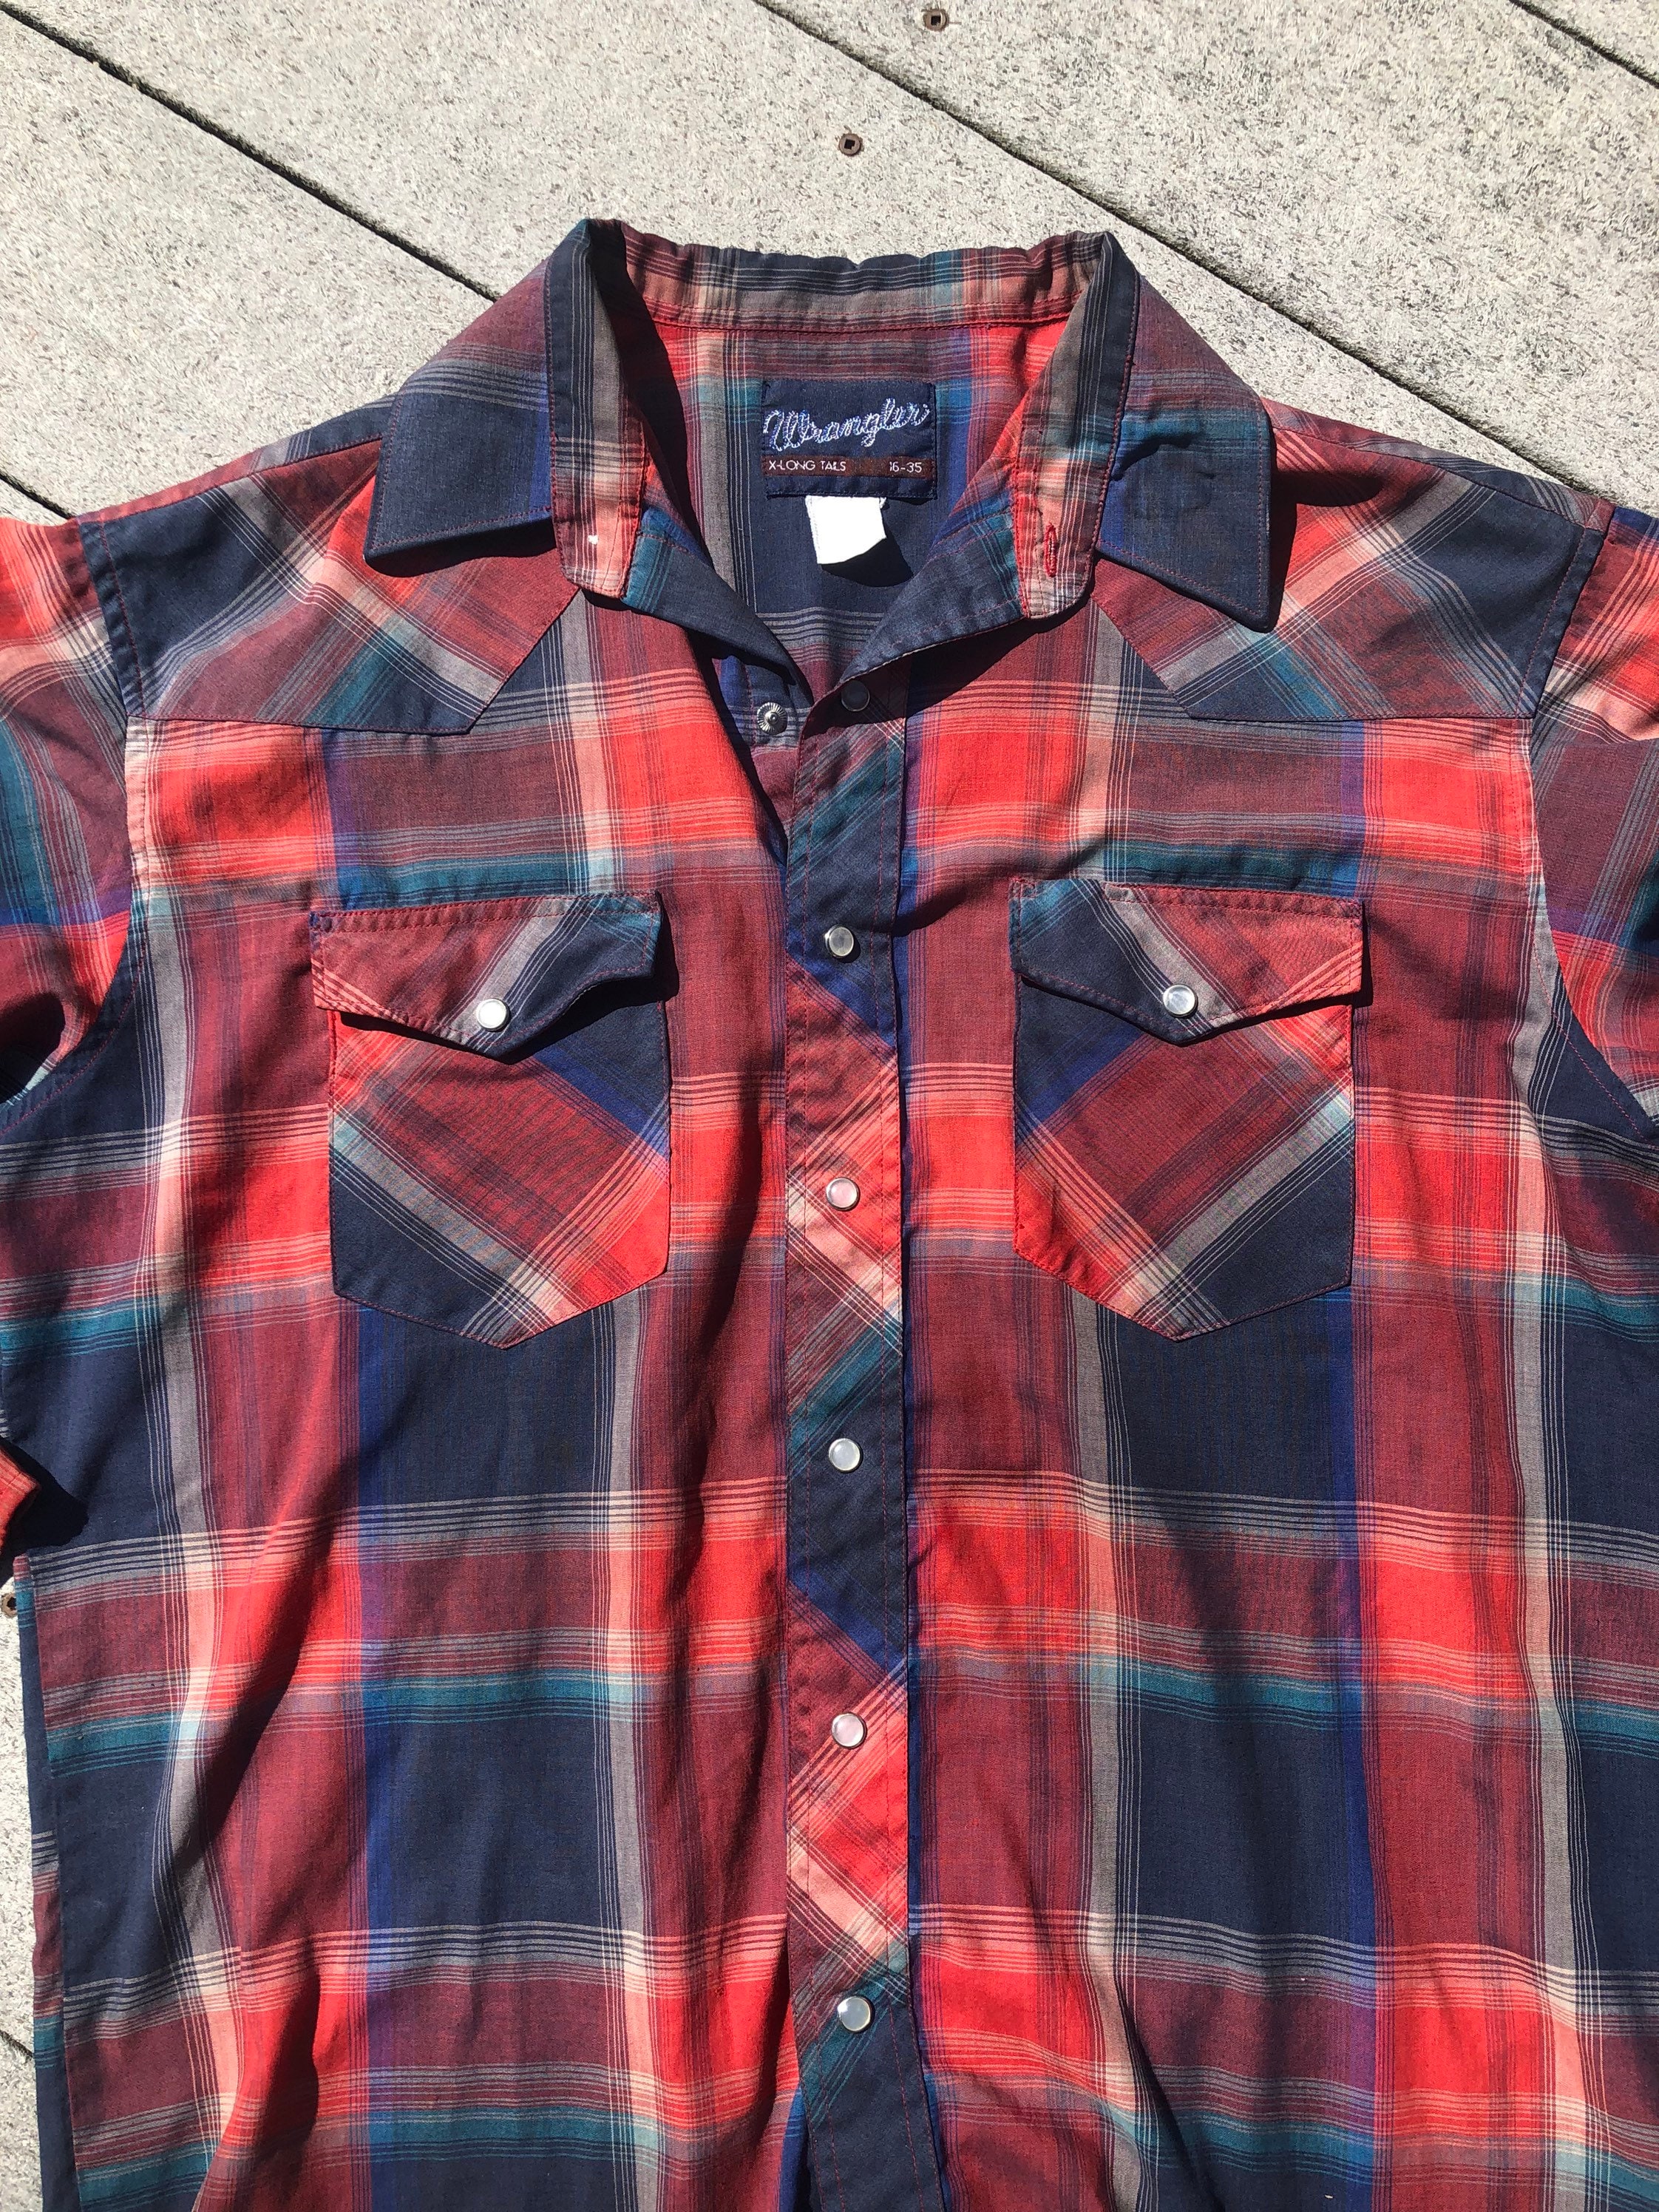 90s Wrangler Pearl Snap Button Shirt — Nothing New